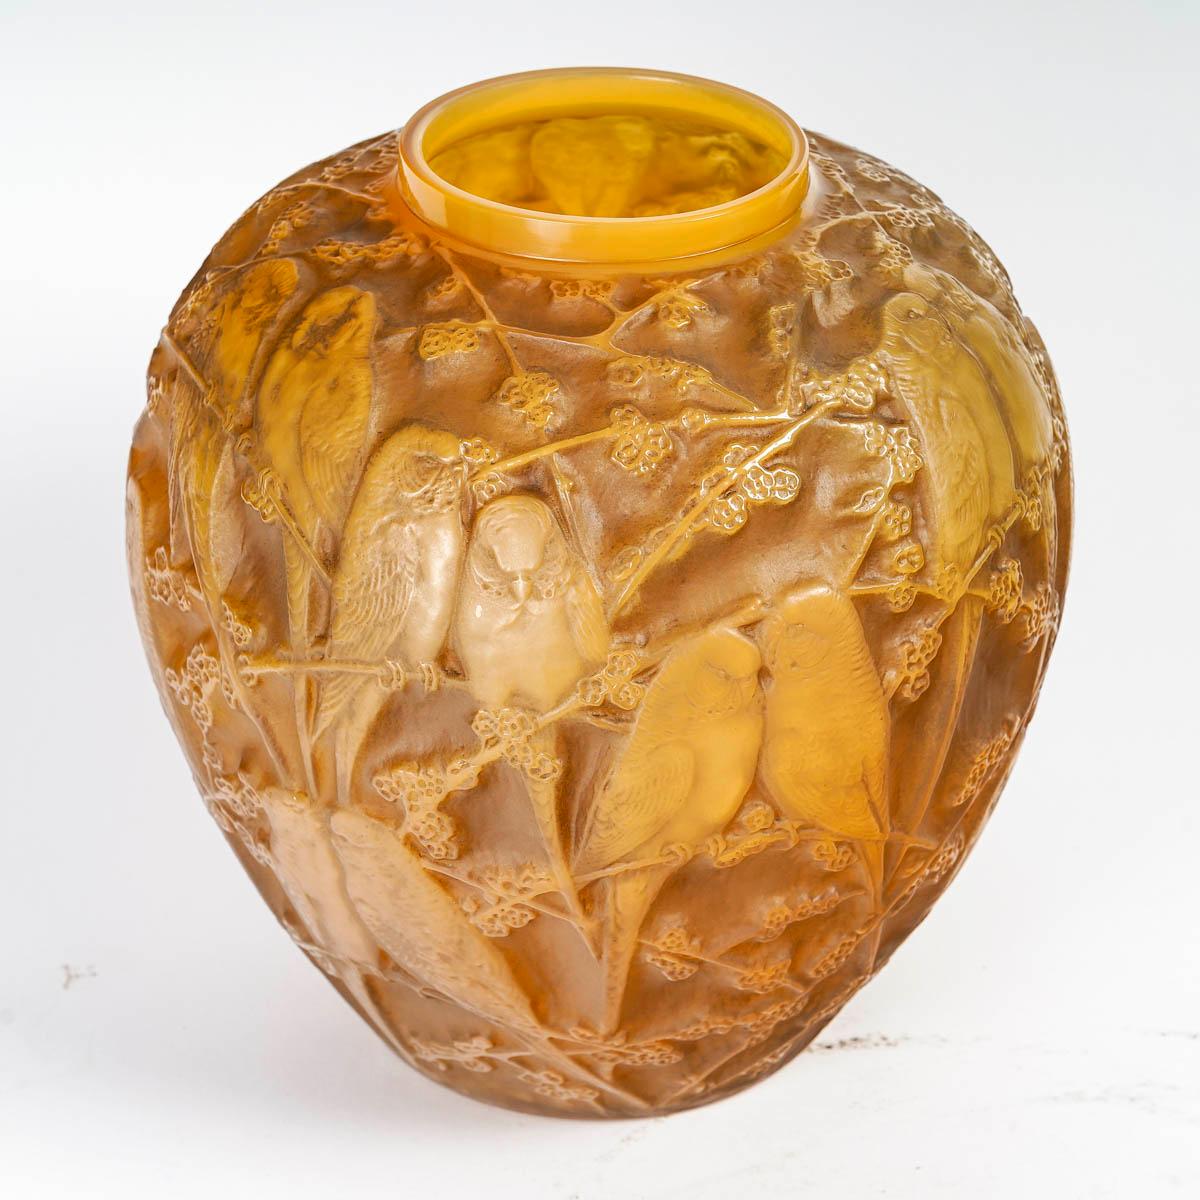 Art Deco 1919 Rene Lalique Vase Perruches Cased Butterscotch Glass with Sepia Patina For Sale